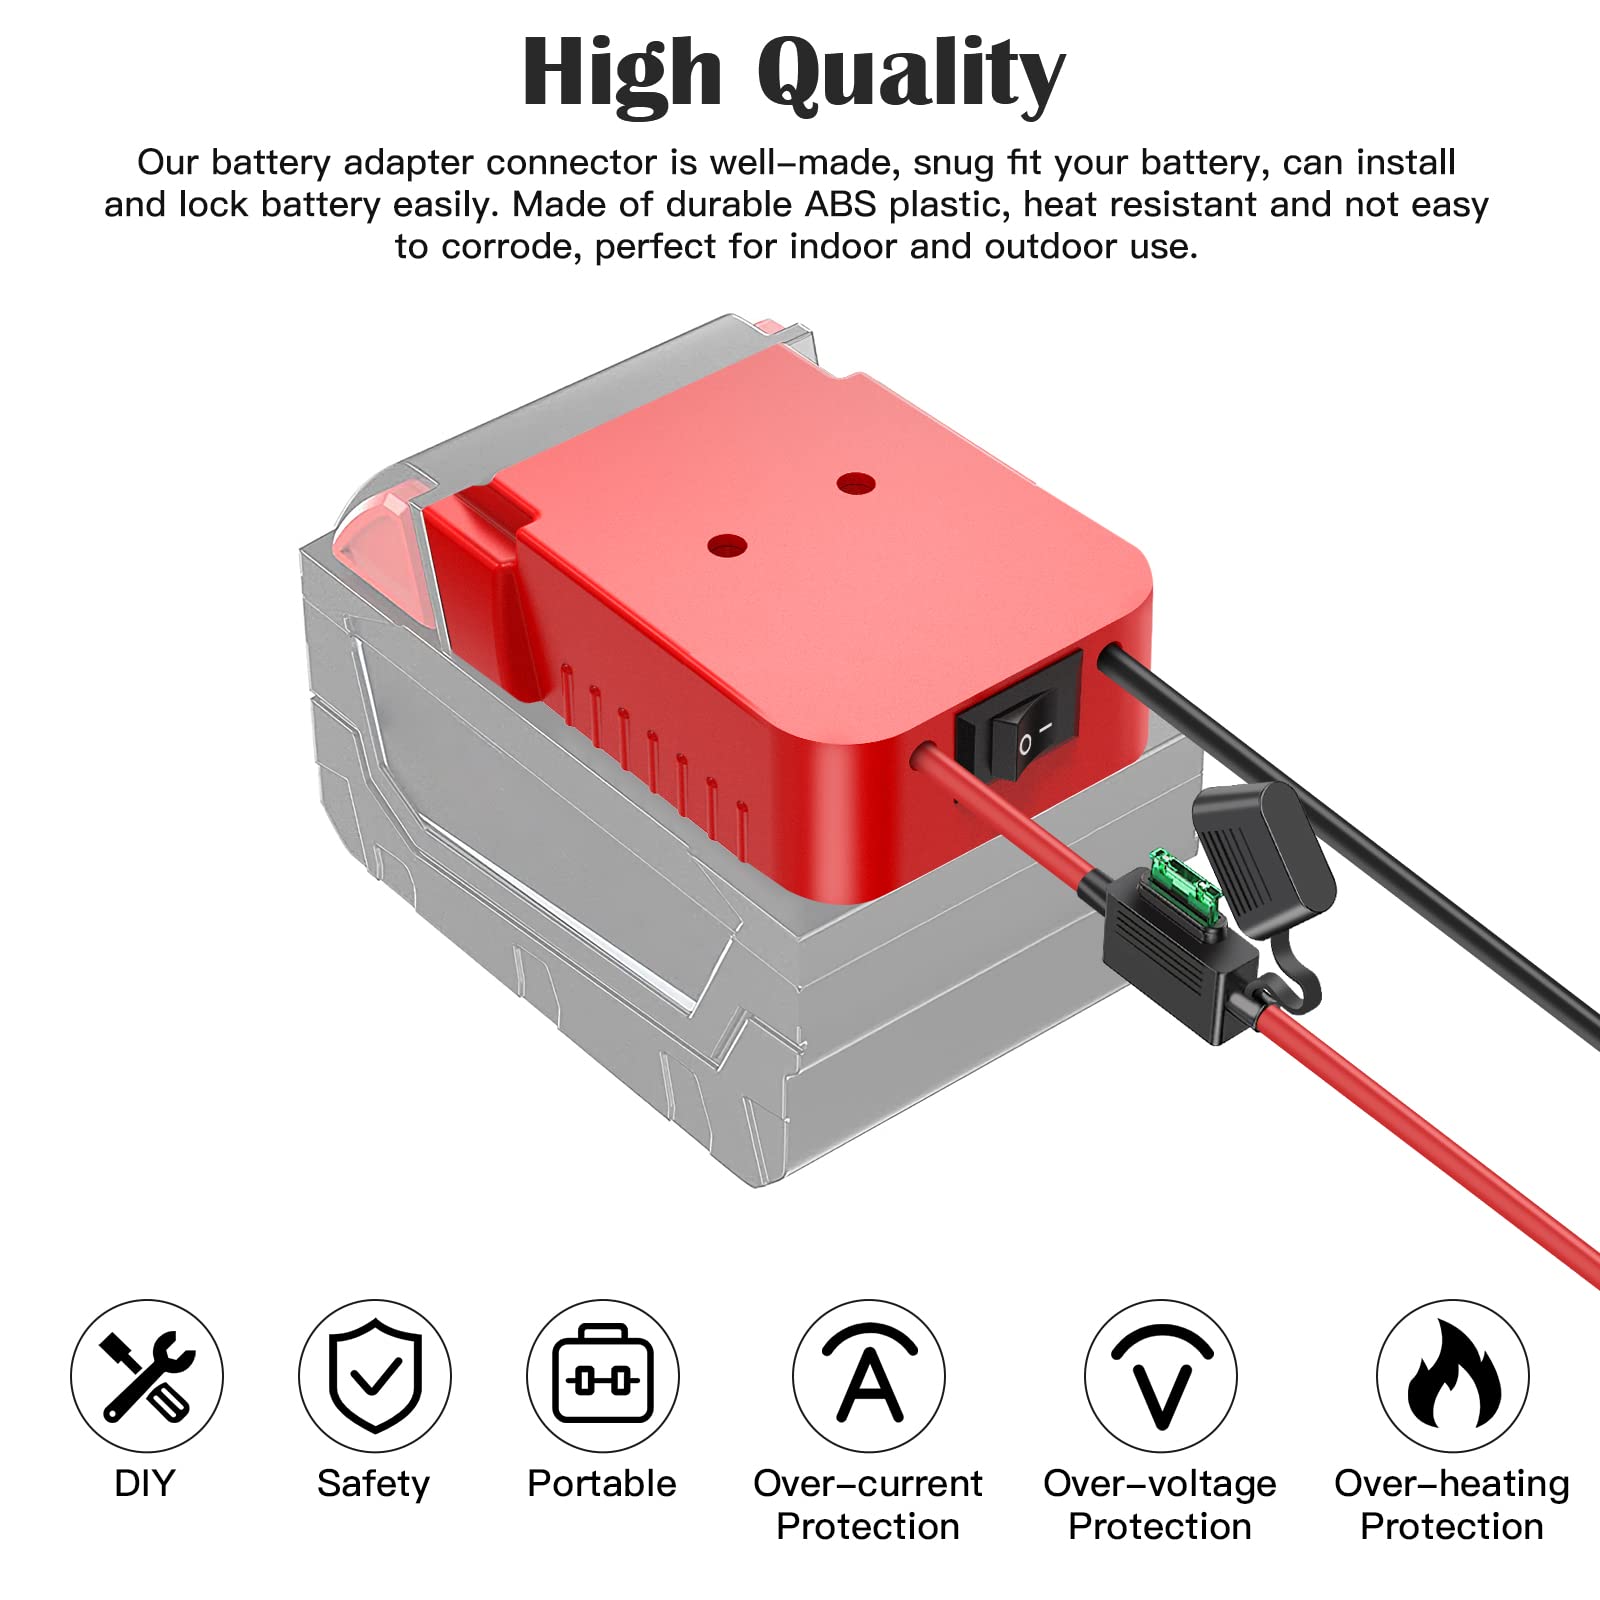 Power Wheels Adapter for Milwaukee M18 Battery Adapter 18V Power Wheels Battery Conversion Kit with Switch, Fuse & Wire Terminals, 12AWG Wire, Power Connector for DIY Rc Car Toys and Robotics